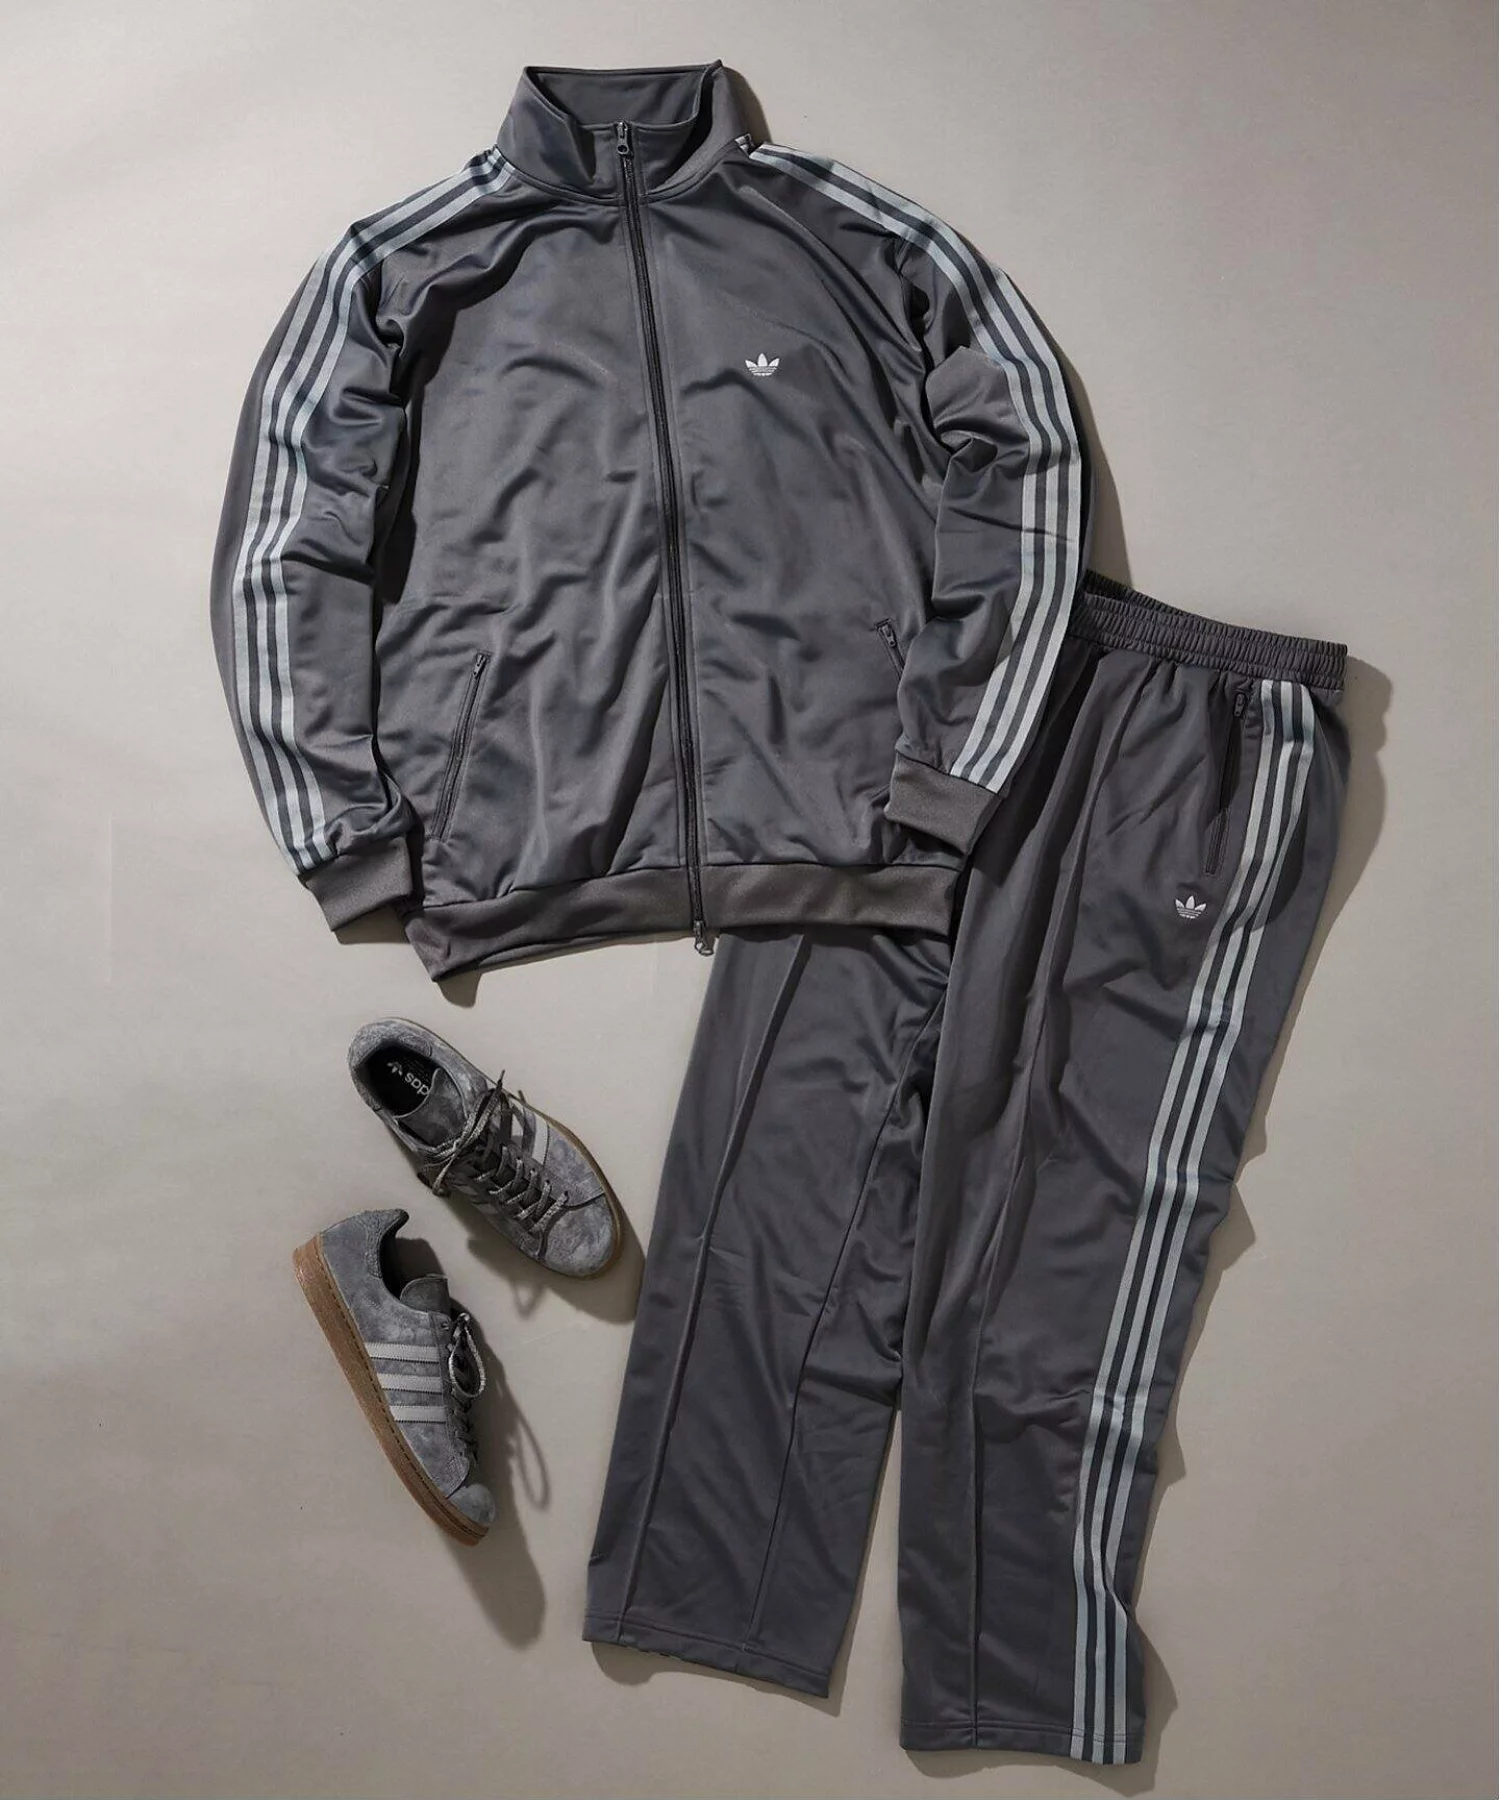 JOURNAL STANDARD x ADIDAS CAMPUS 80s / BB TRACKTOP & TRACKPANT 4月13日/4月27日発売